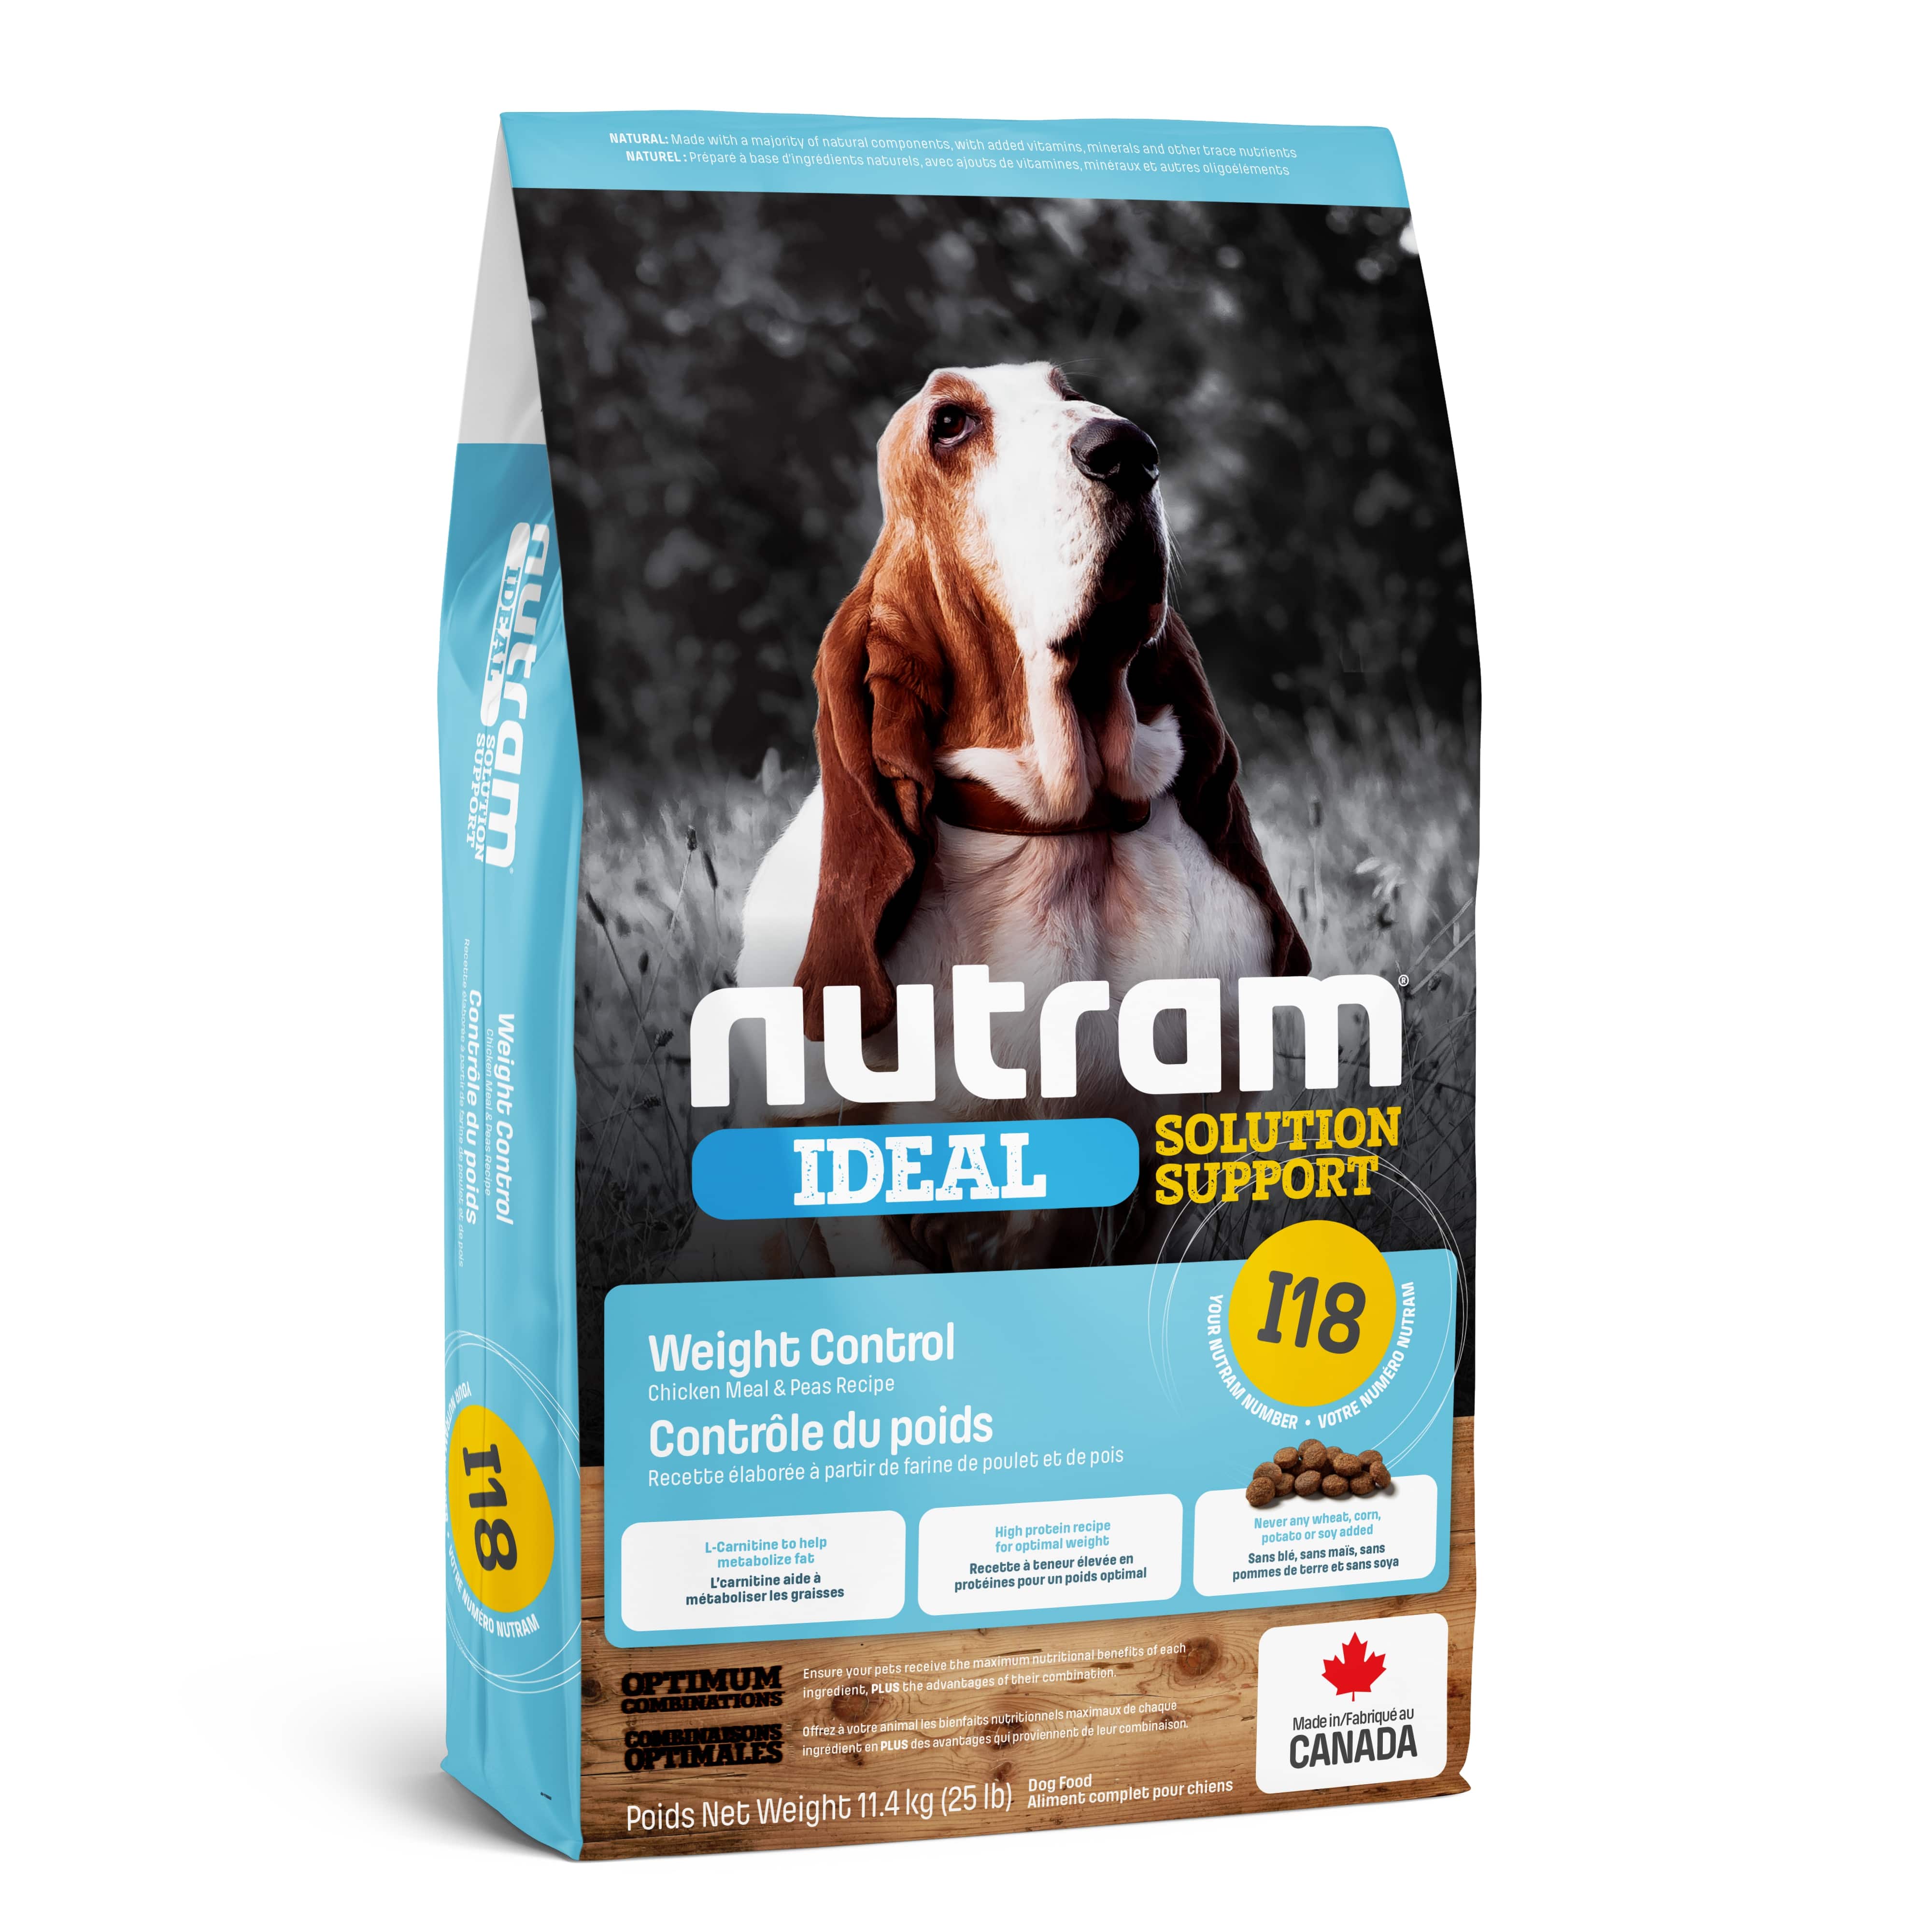 I18 Nutram Ideal Solution Support® Weight Control Dog Food 